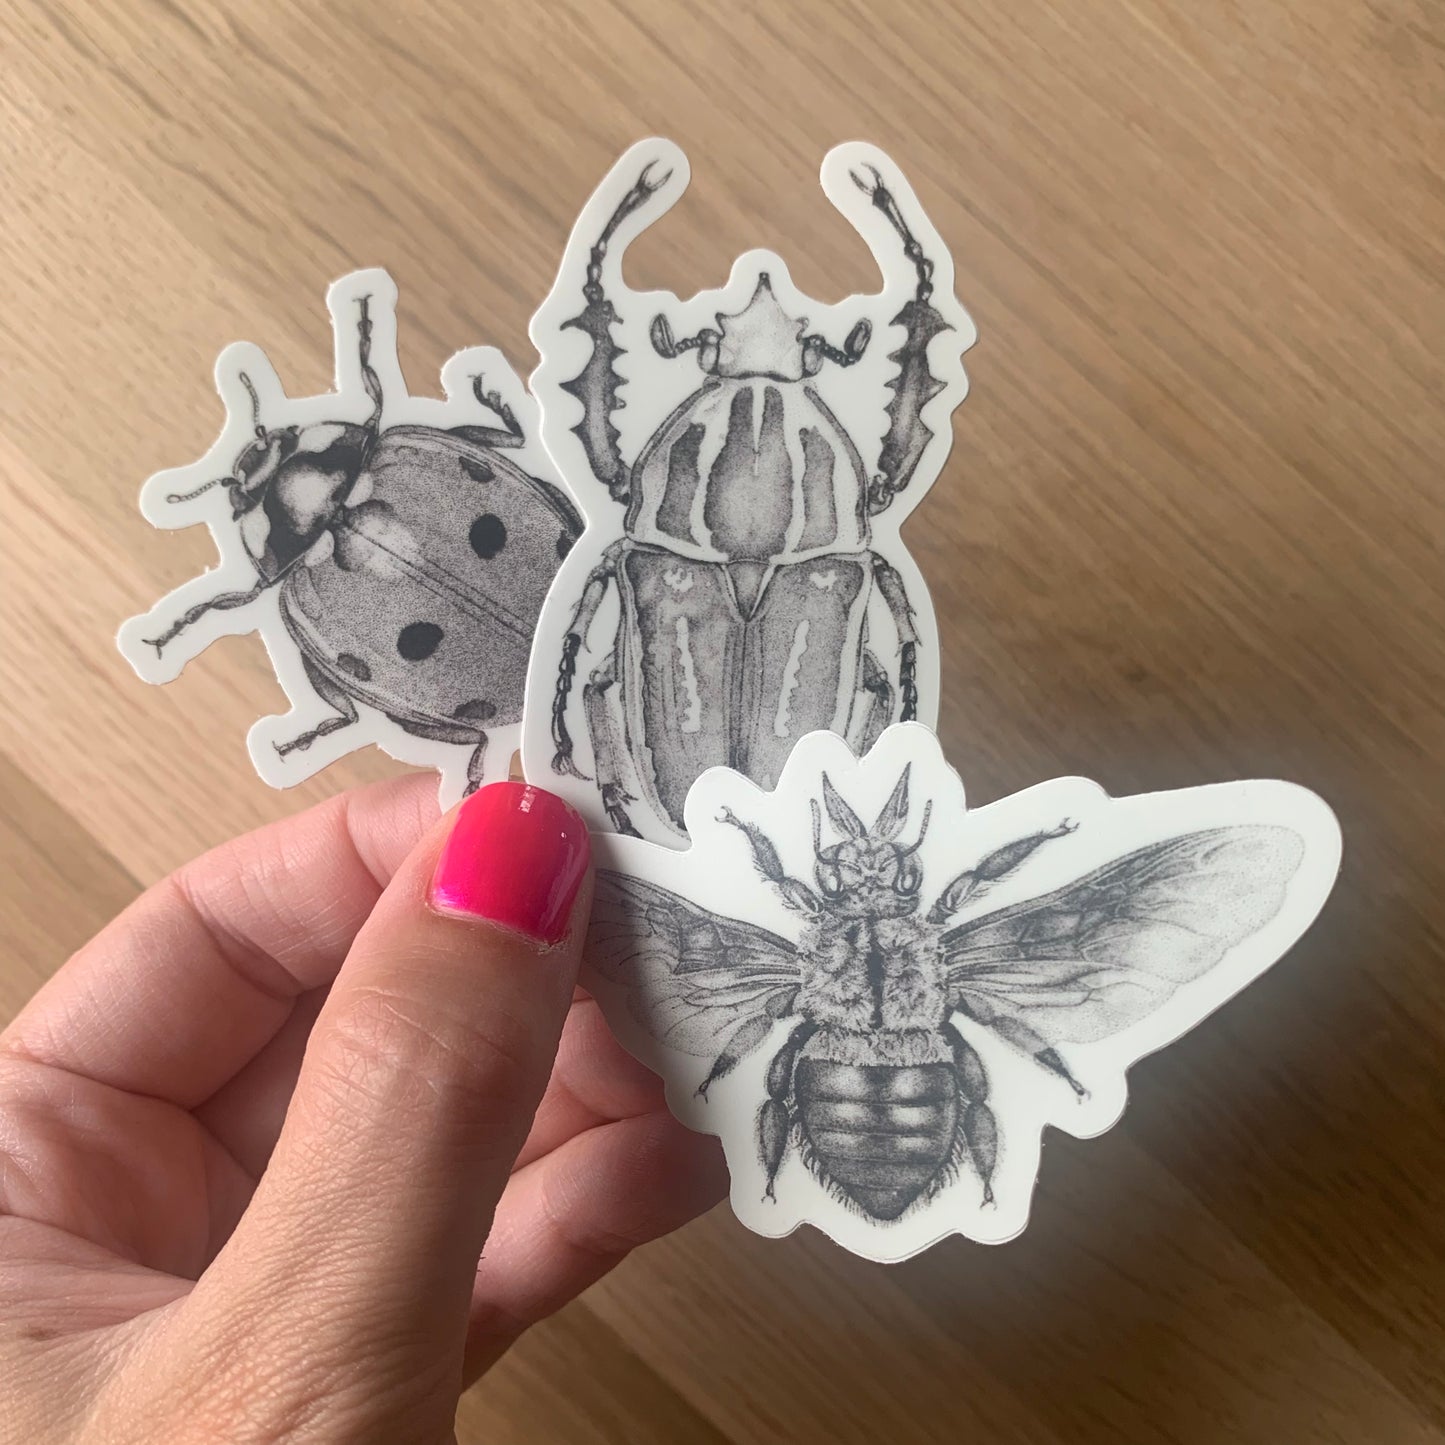 Insect Stickers